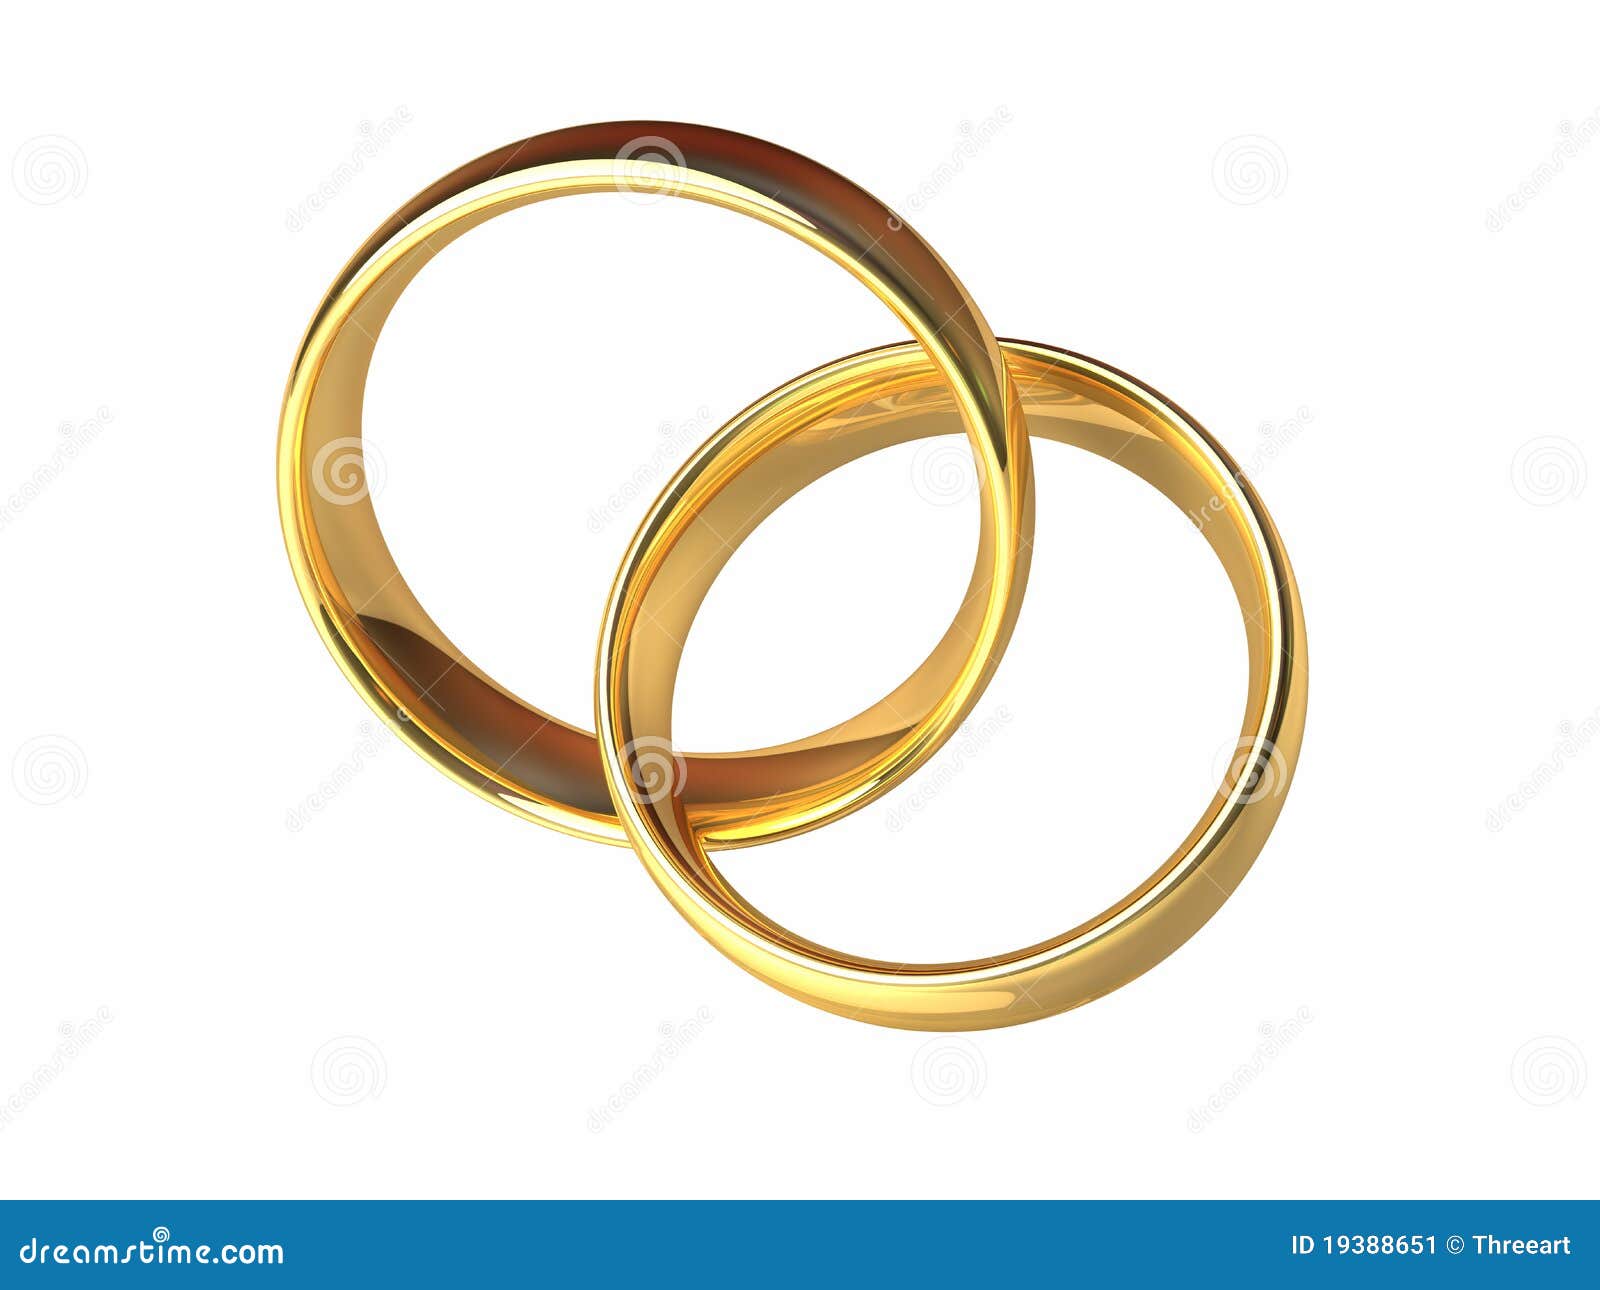 linked wedding rings clipart - photo #9